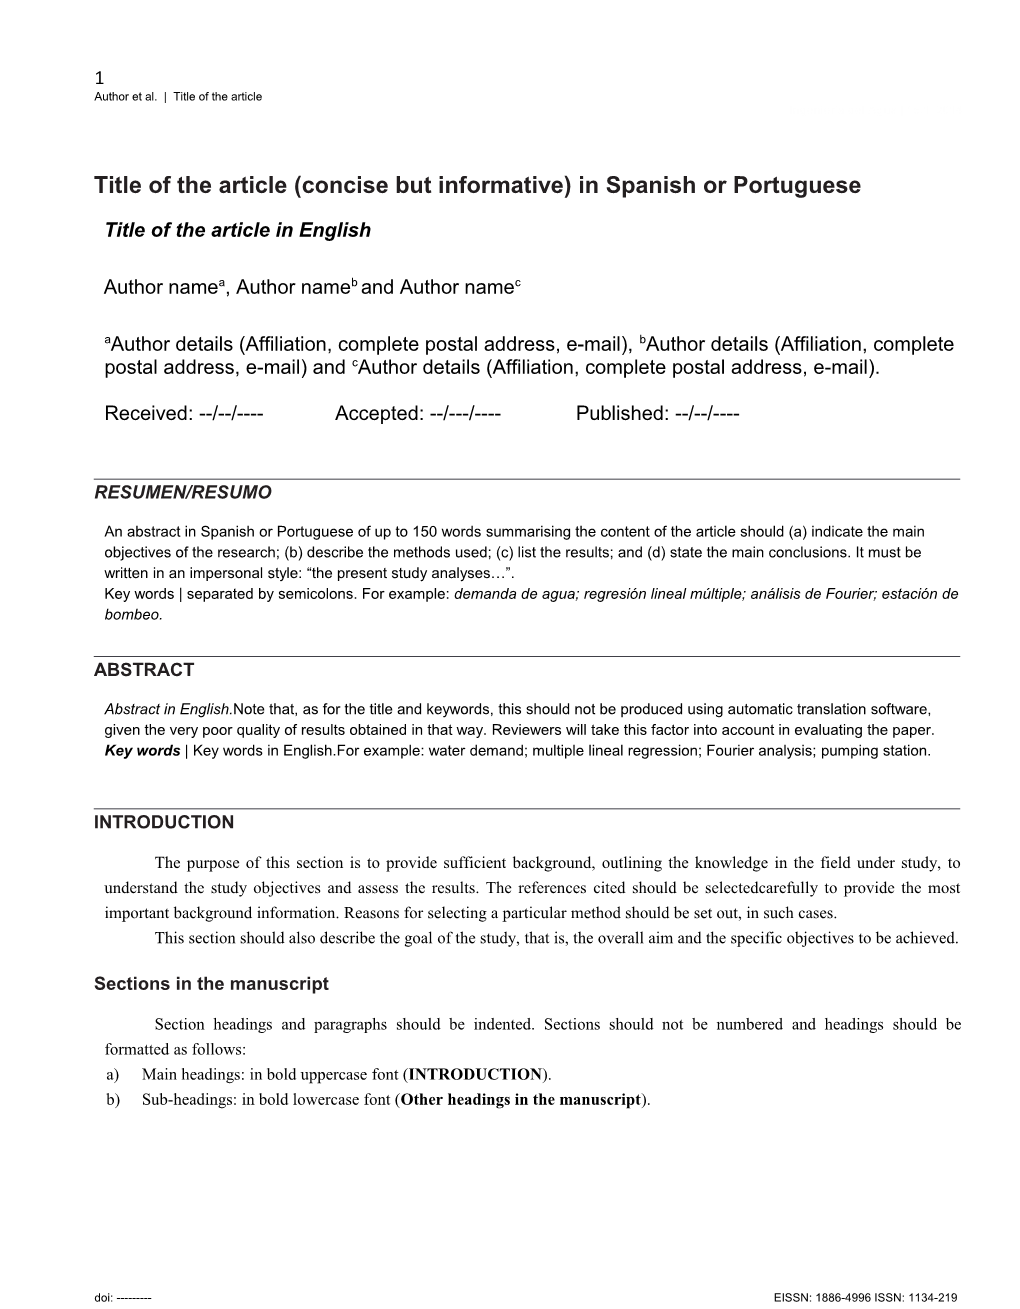 Title of the Article (Concise Butinformative) in Spanish Or Portuguese